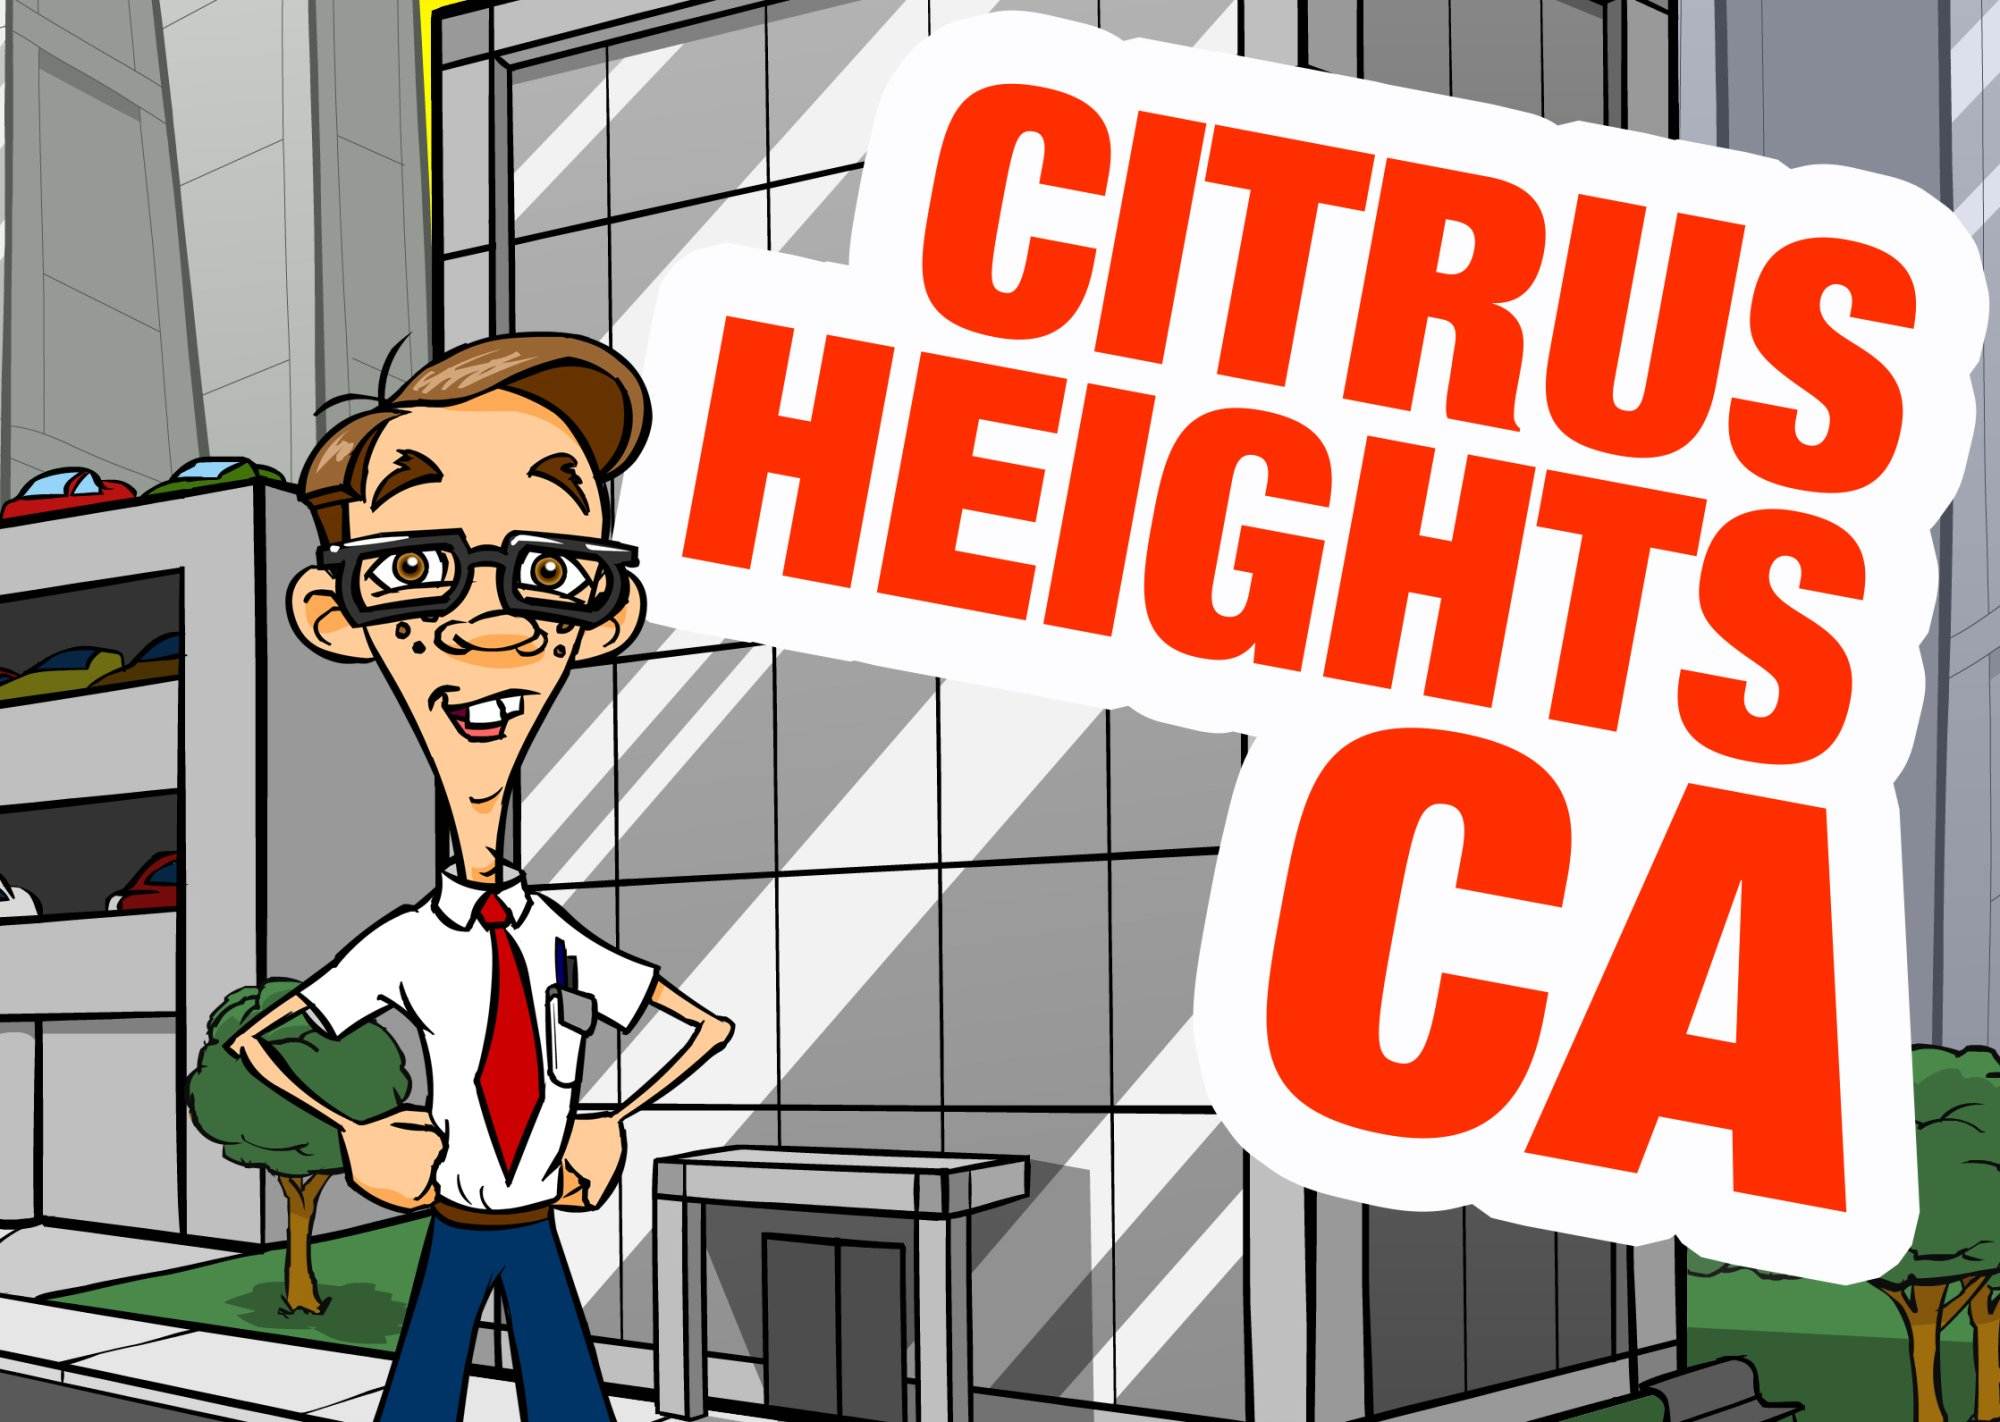 Nerds On Call Citrus Heights graphic.